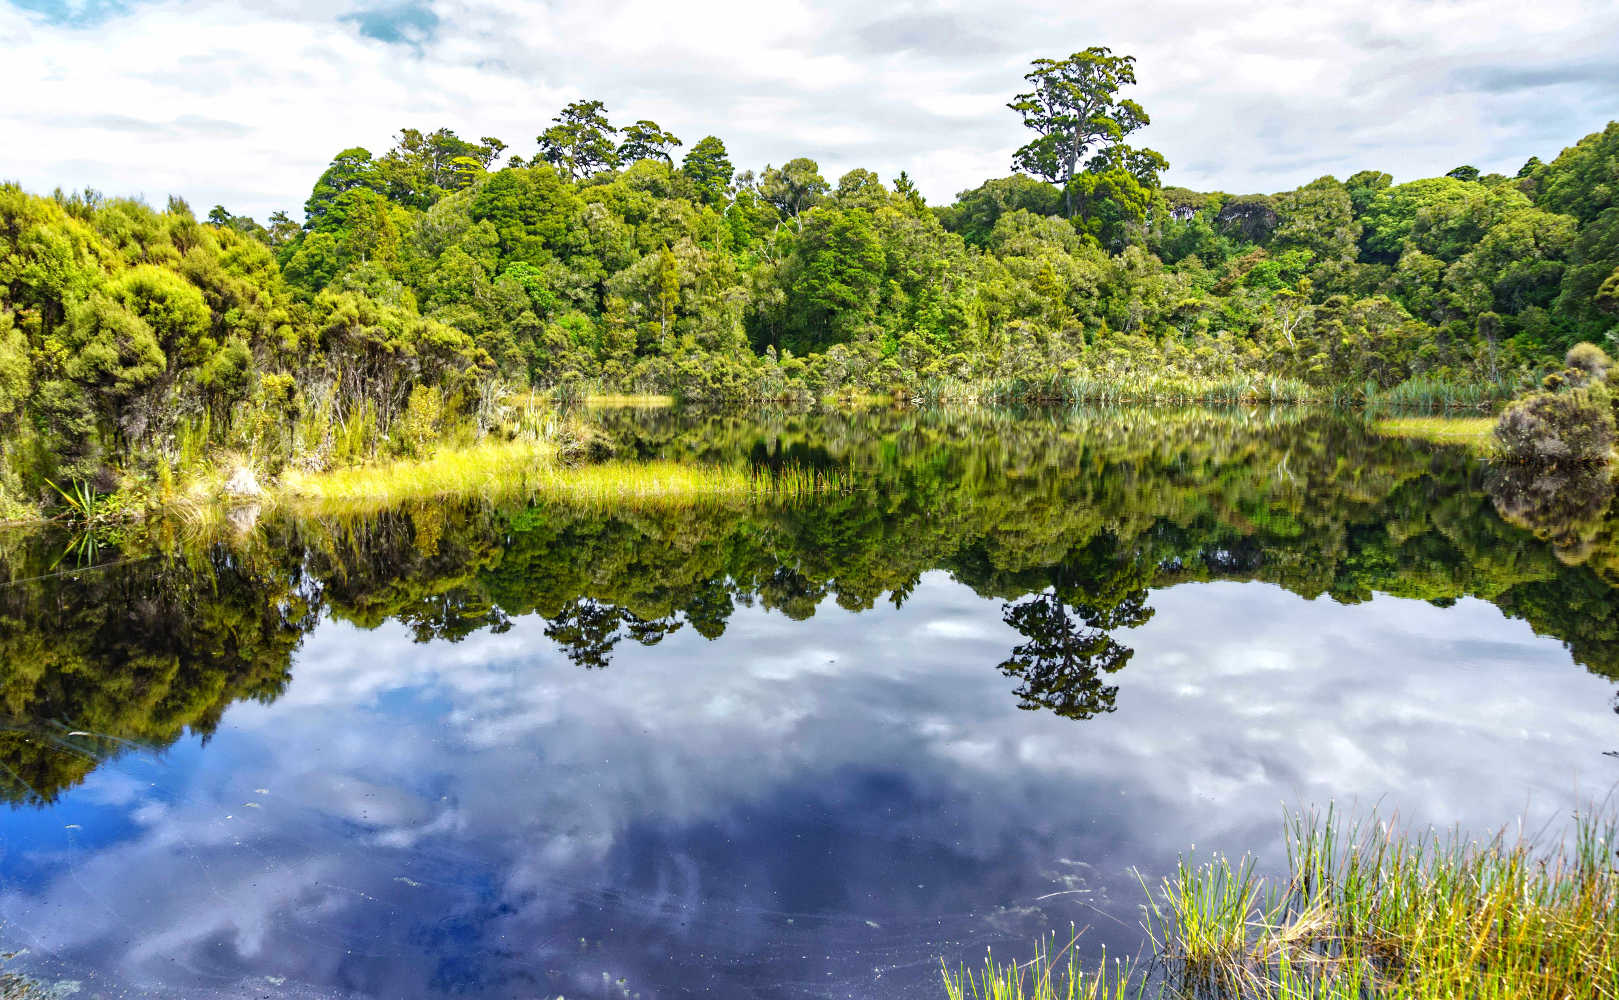 Surrounding bush and forest reflected idylically in calm water small Lake Wilkie in Catlins, Southland New Zealand.